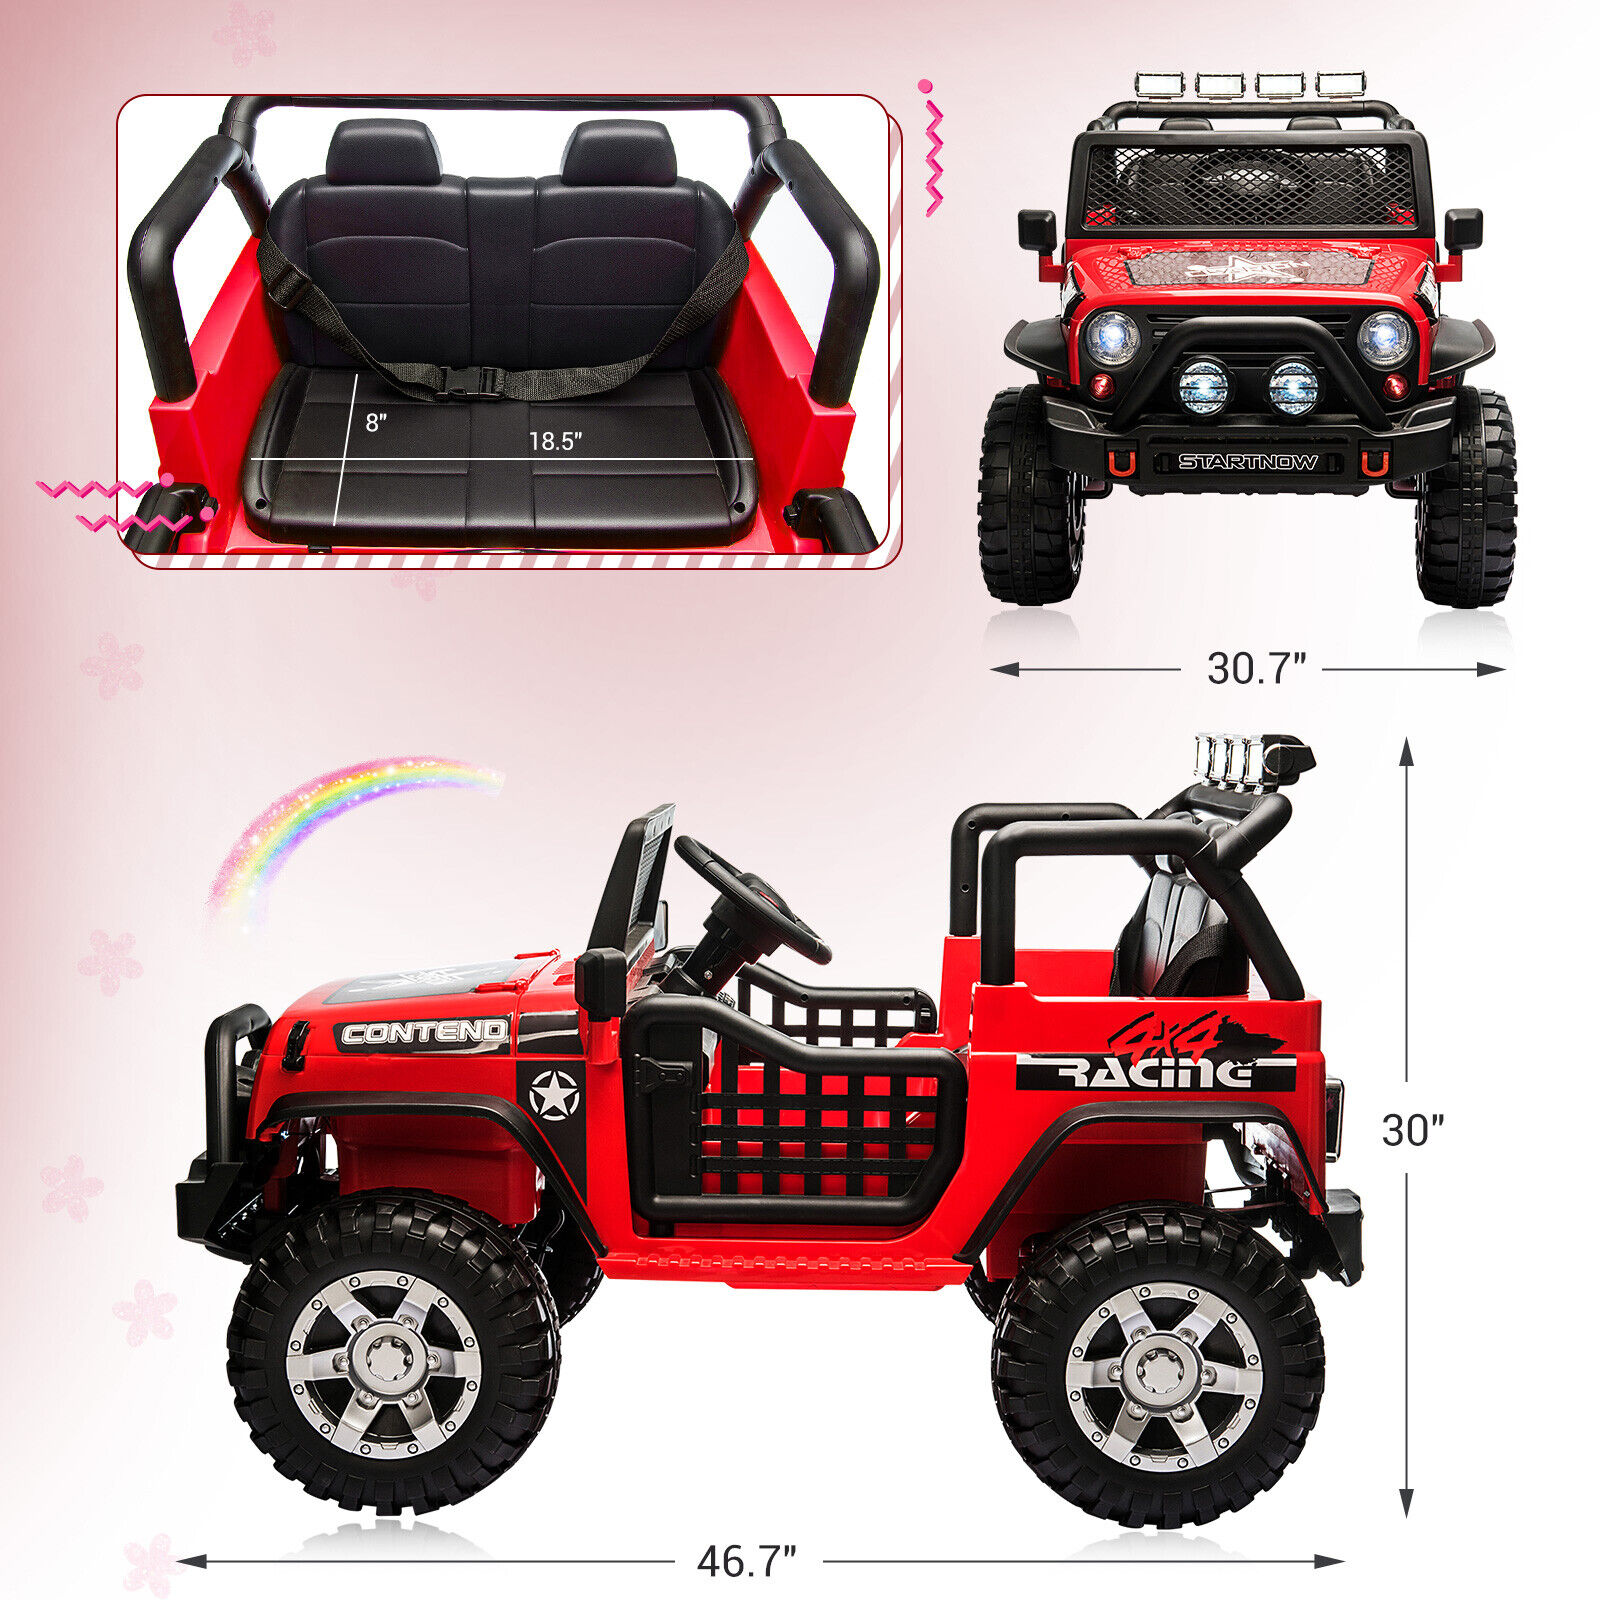 Dazone 12V Kids Ride on Jeep Car, Electric 2 Seats Off-road Jeep Ride on Truck Vehicle with Remote Control, LED Lights, MP3 Music, Red - image 5 of 7